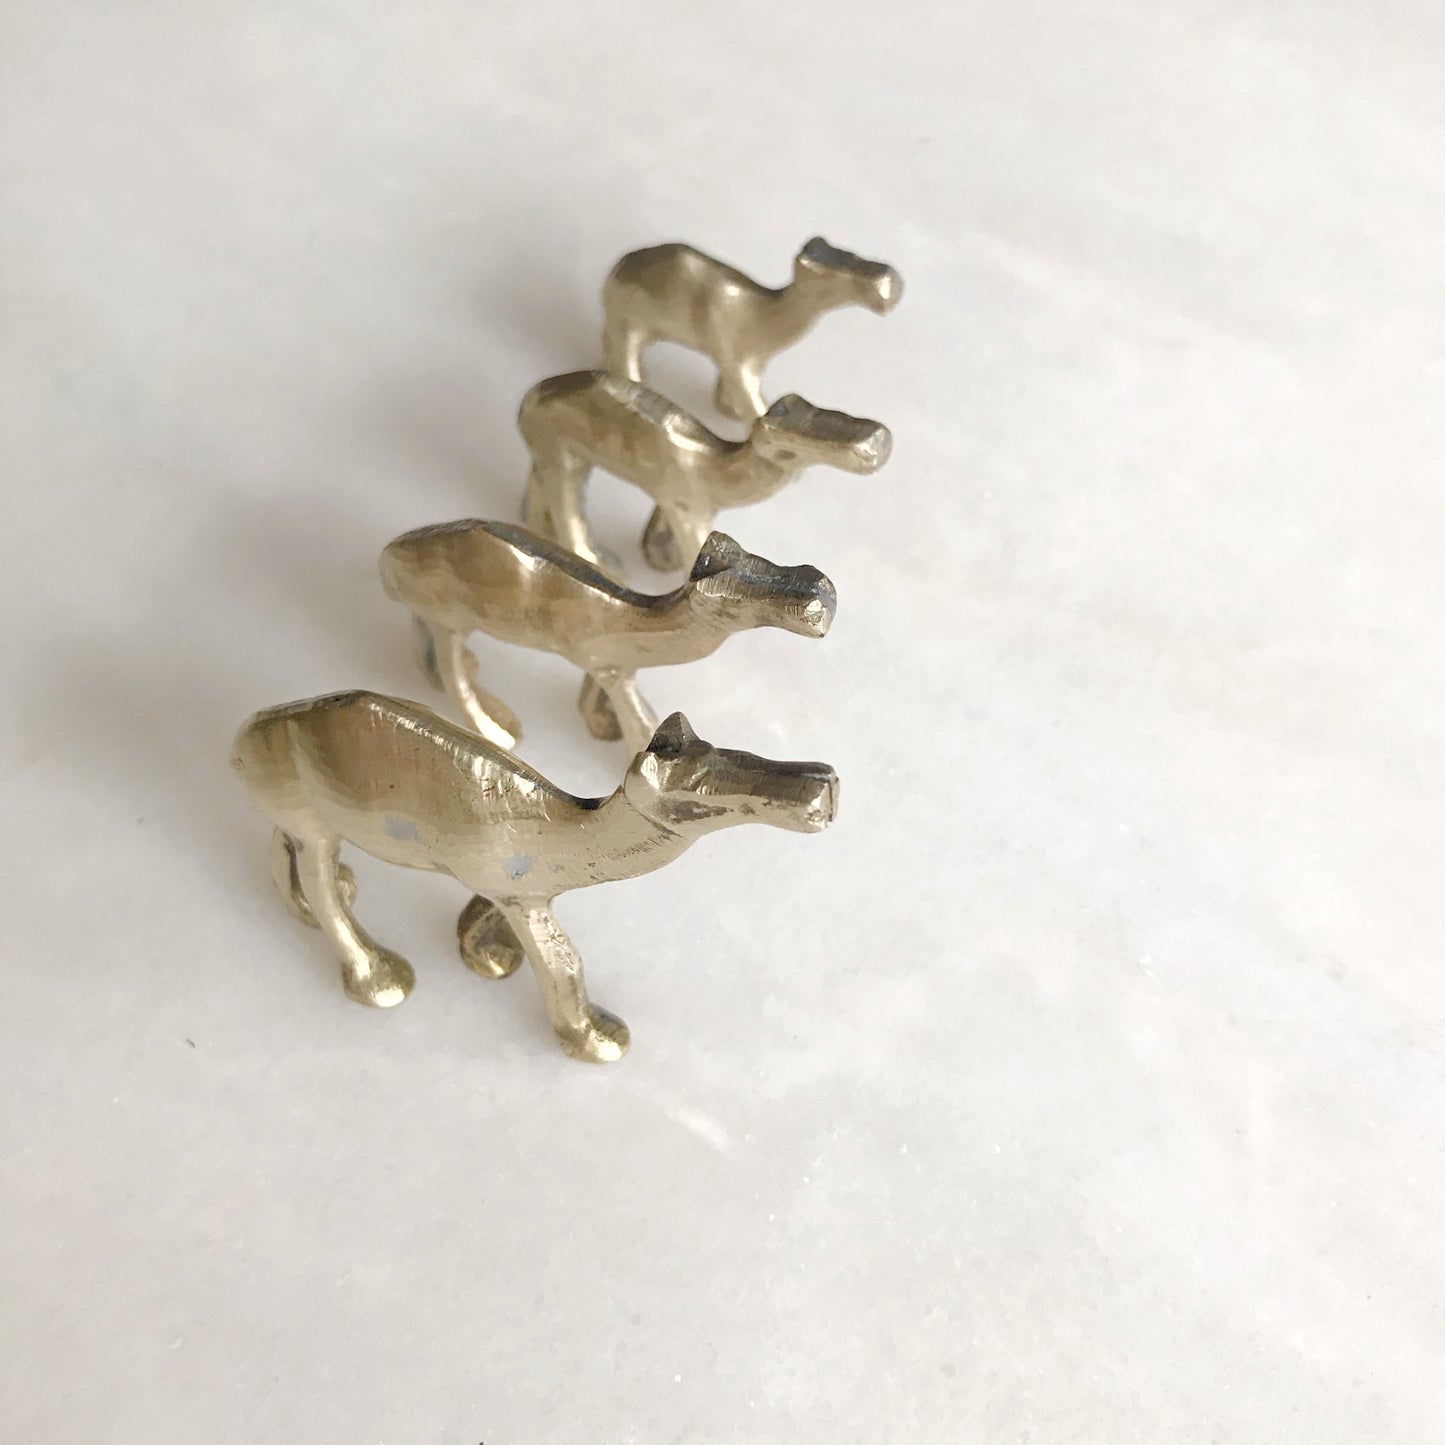 Collection of Small Vintage Brass Camels